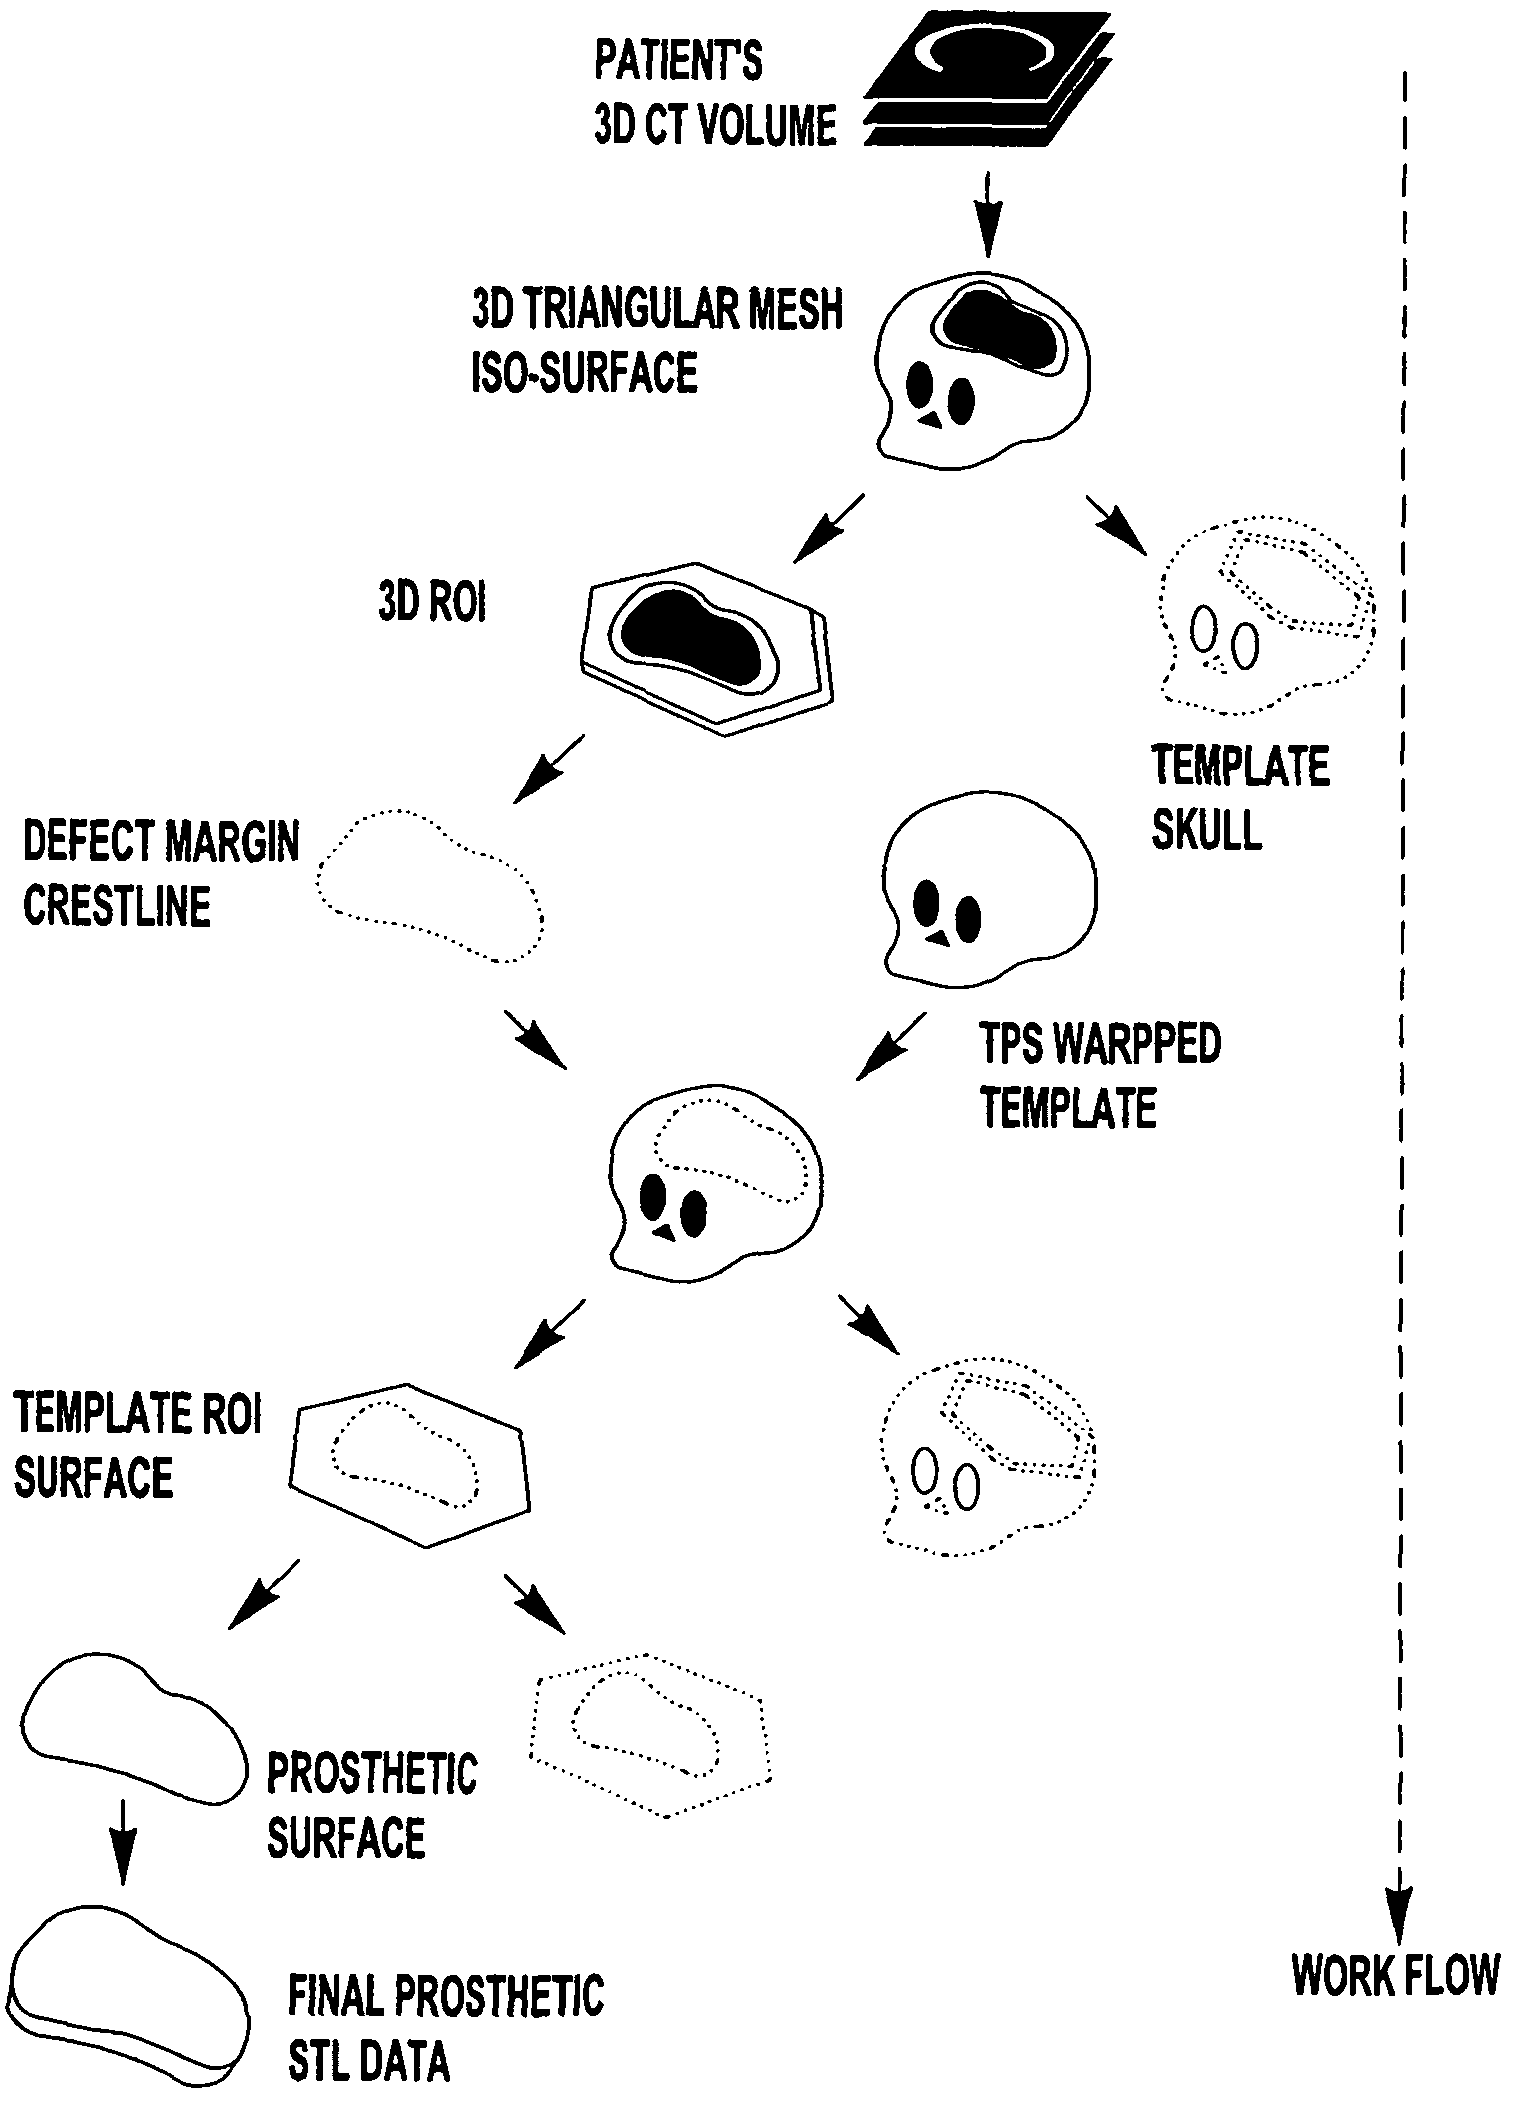 Computer-aided-design of skeletal implants